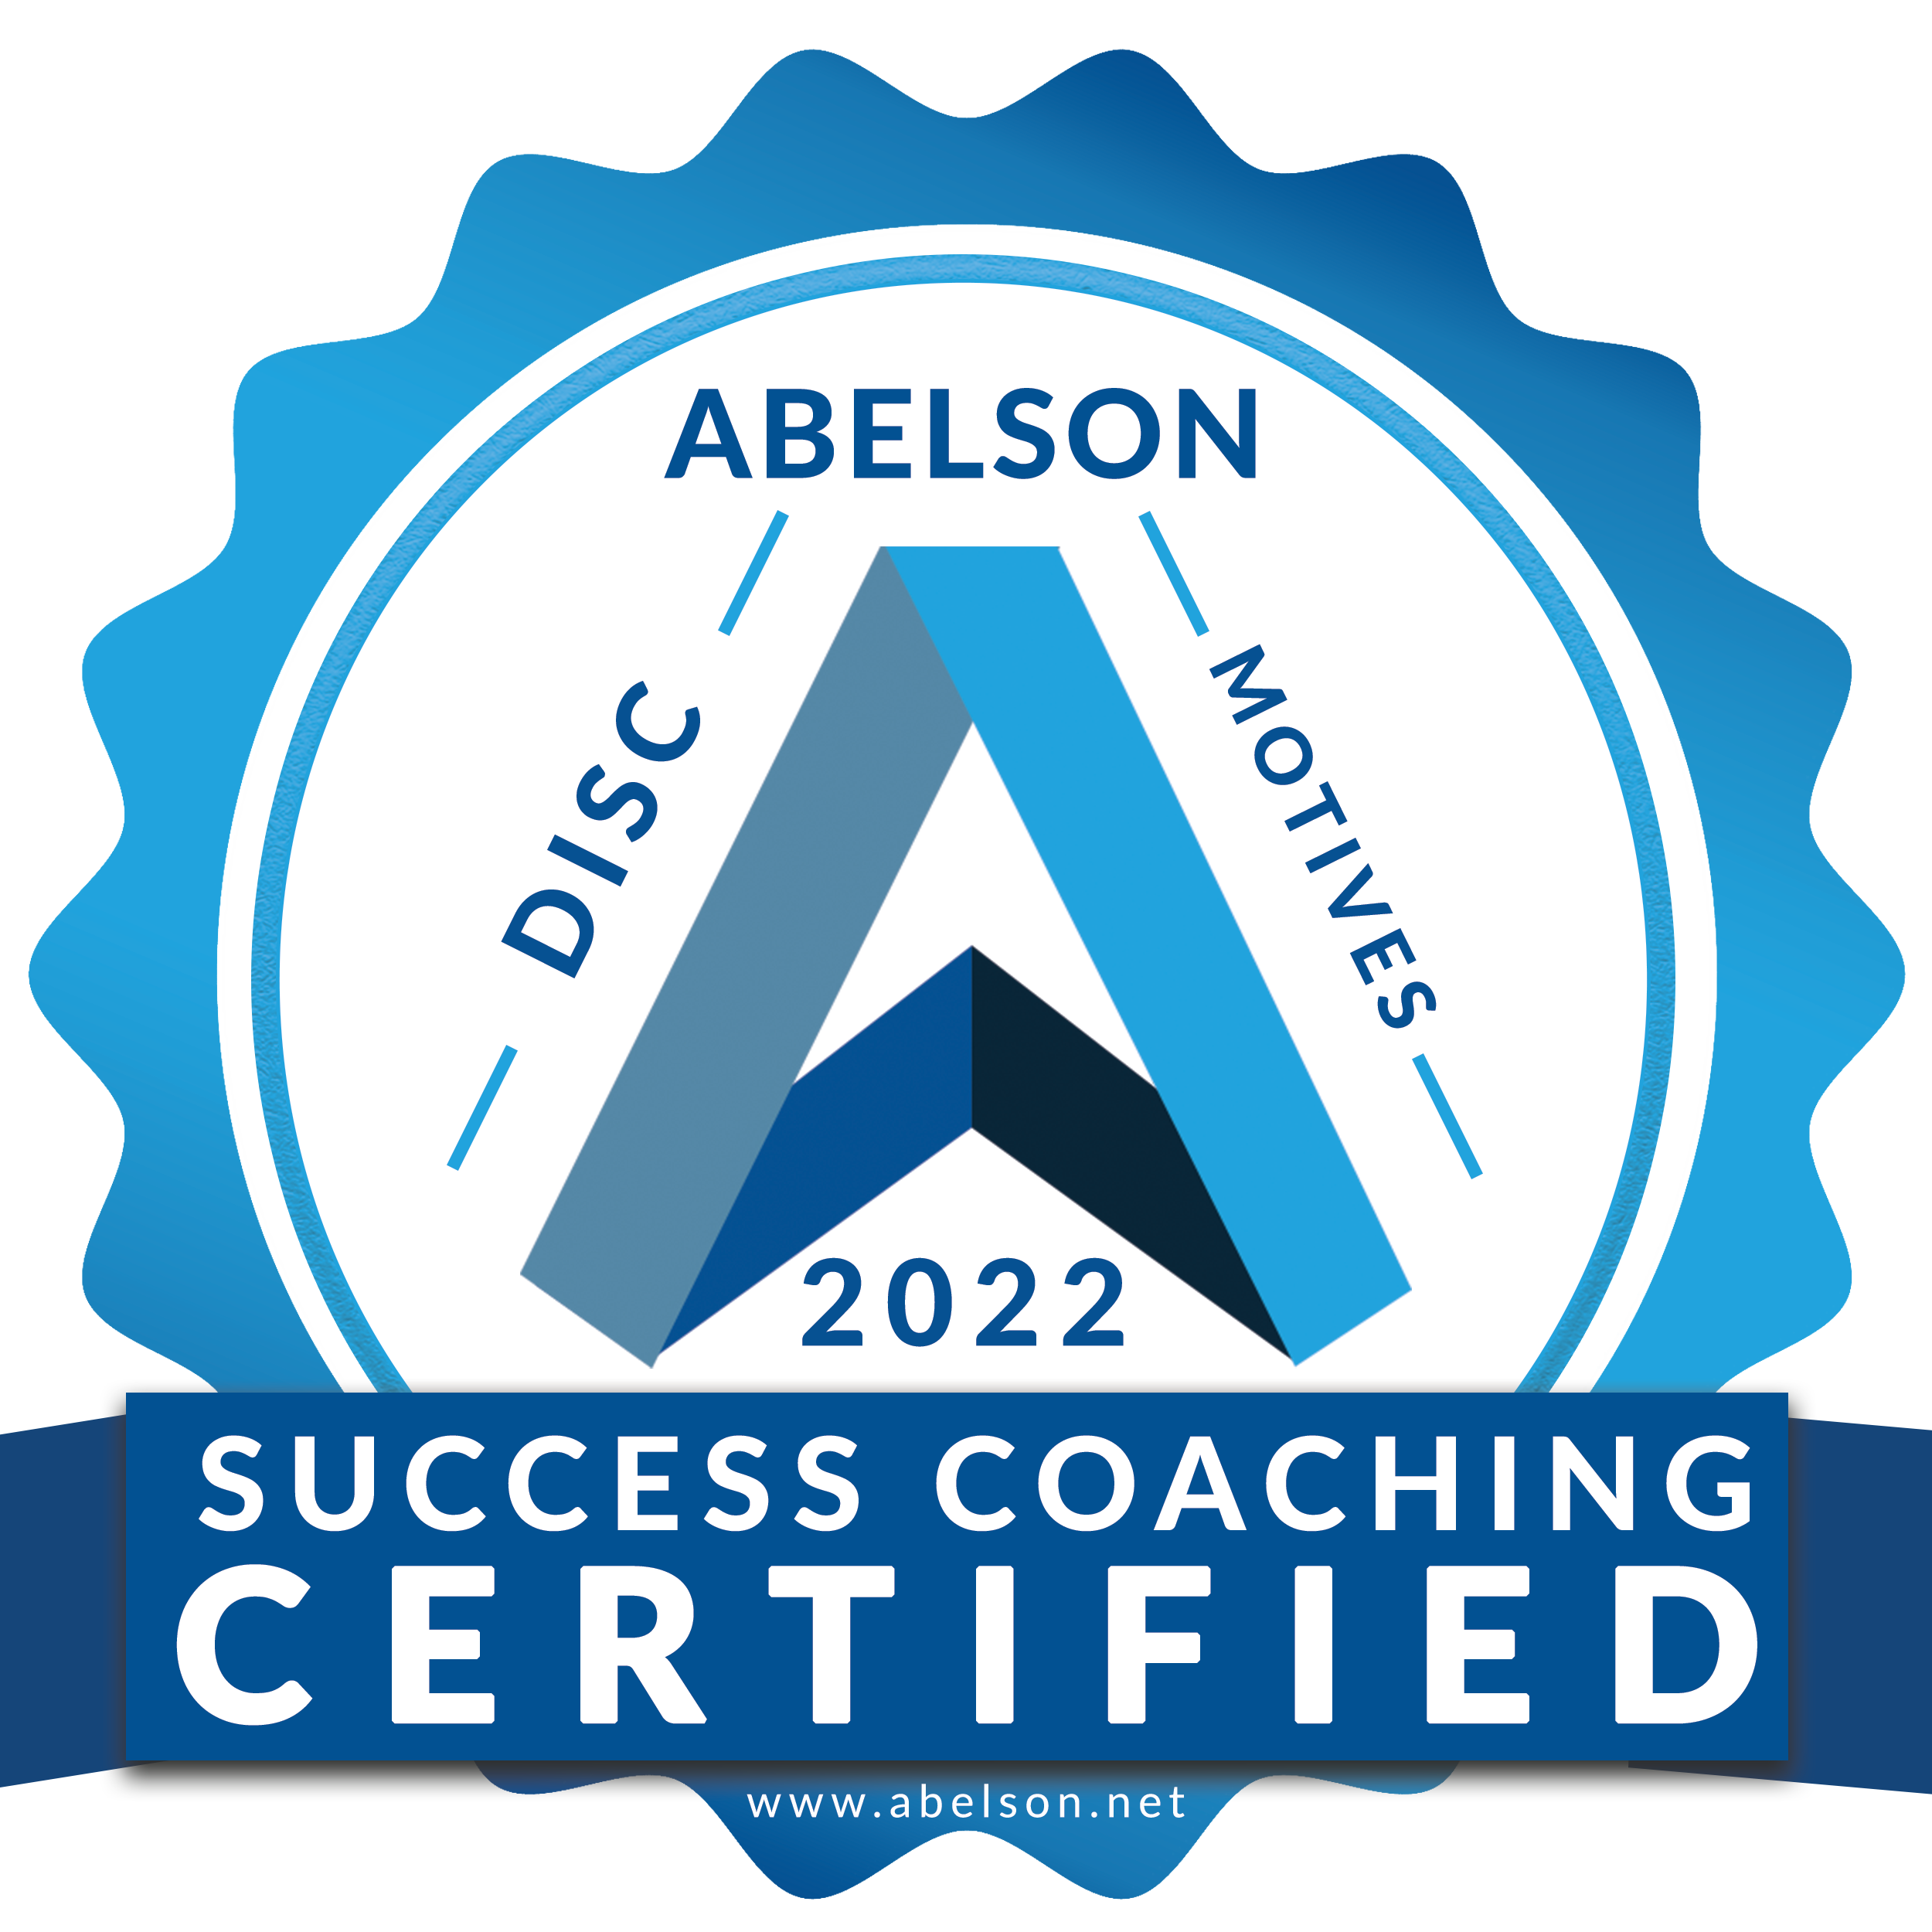 Abelson Certified Badge copy